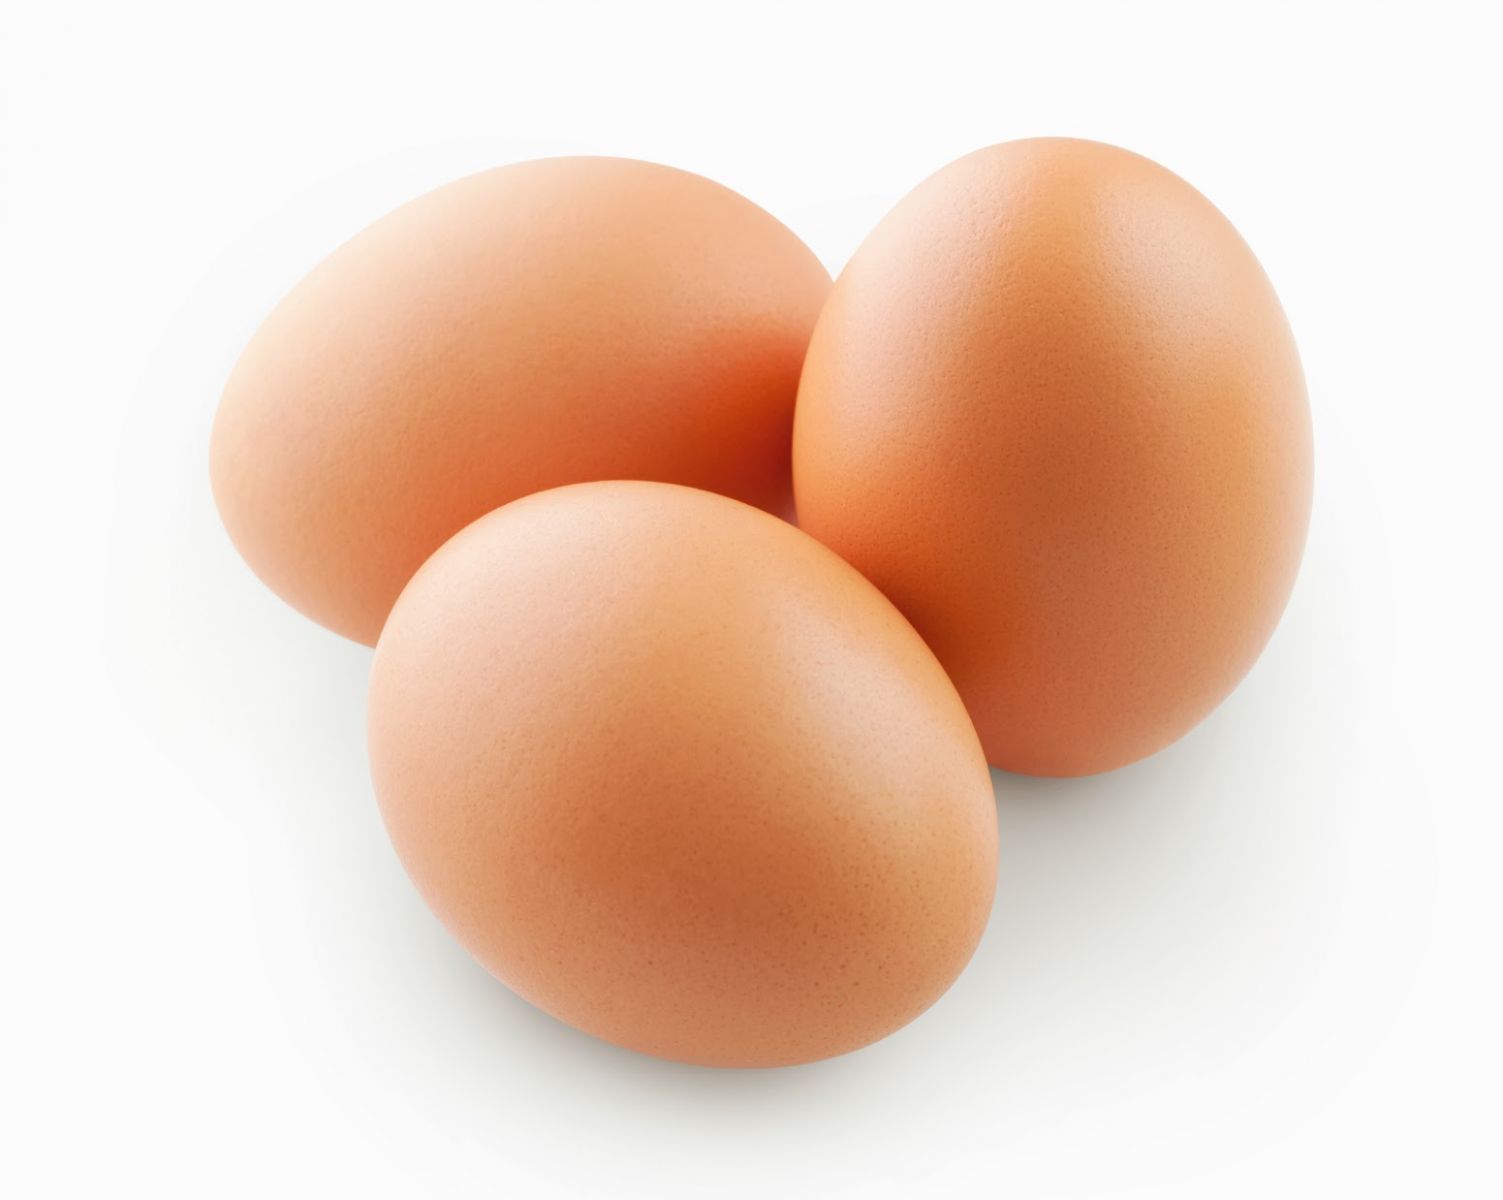 Eggs are rich in Protein